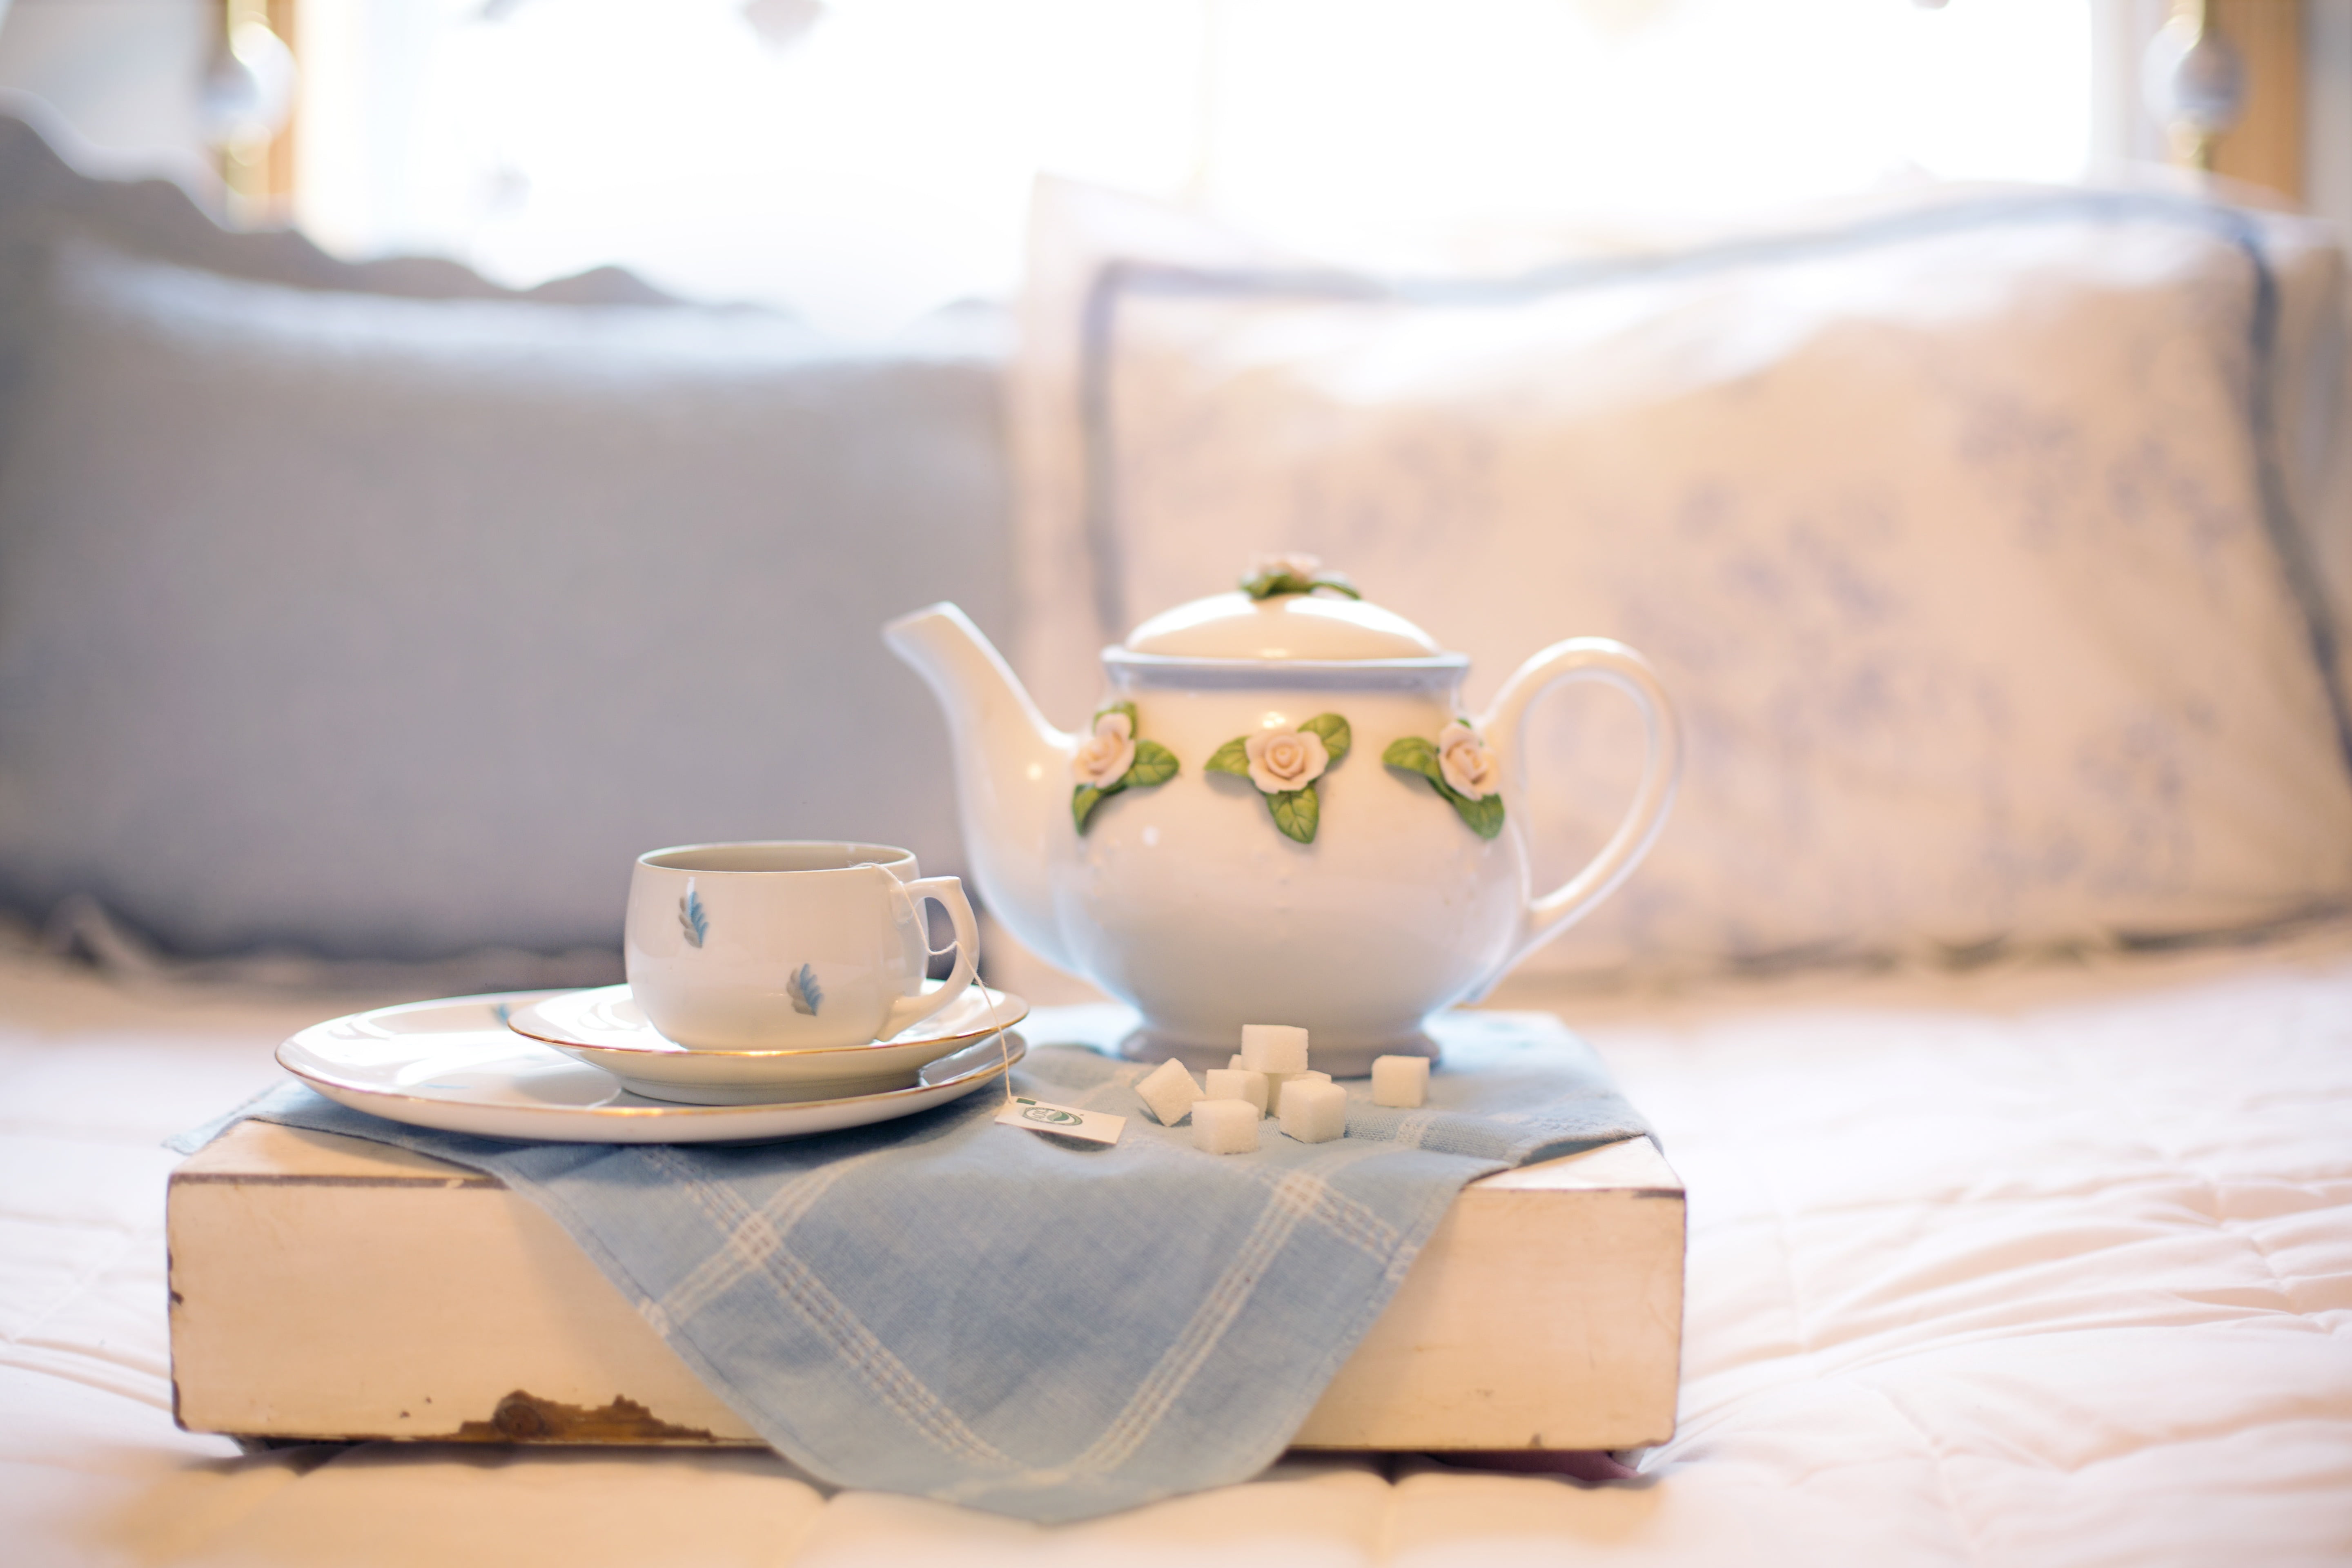 shallow focus photography of white ceramic teapot beside teacup